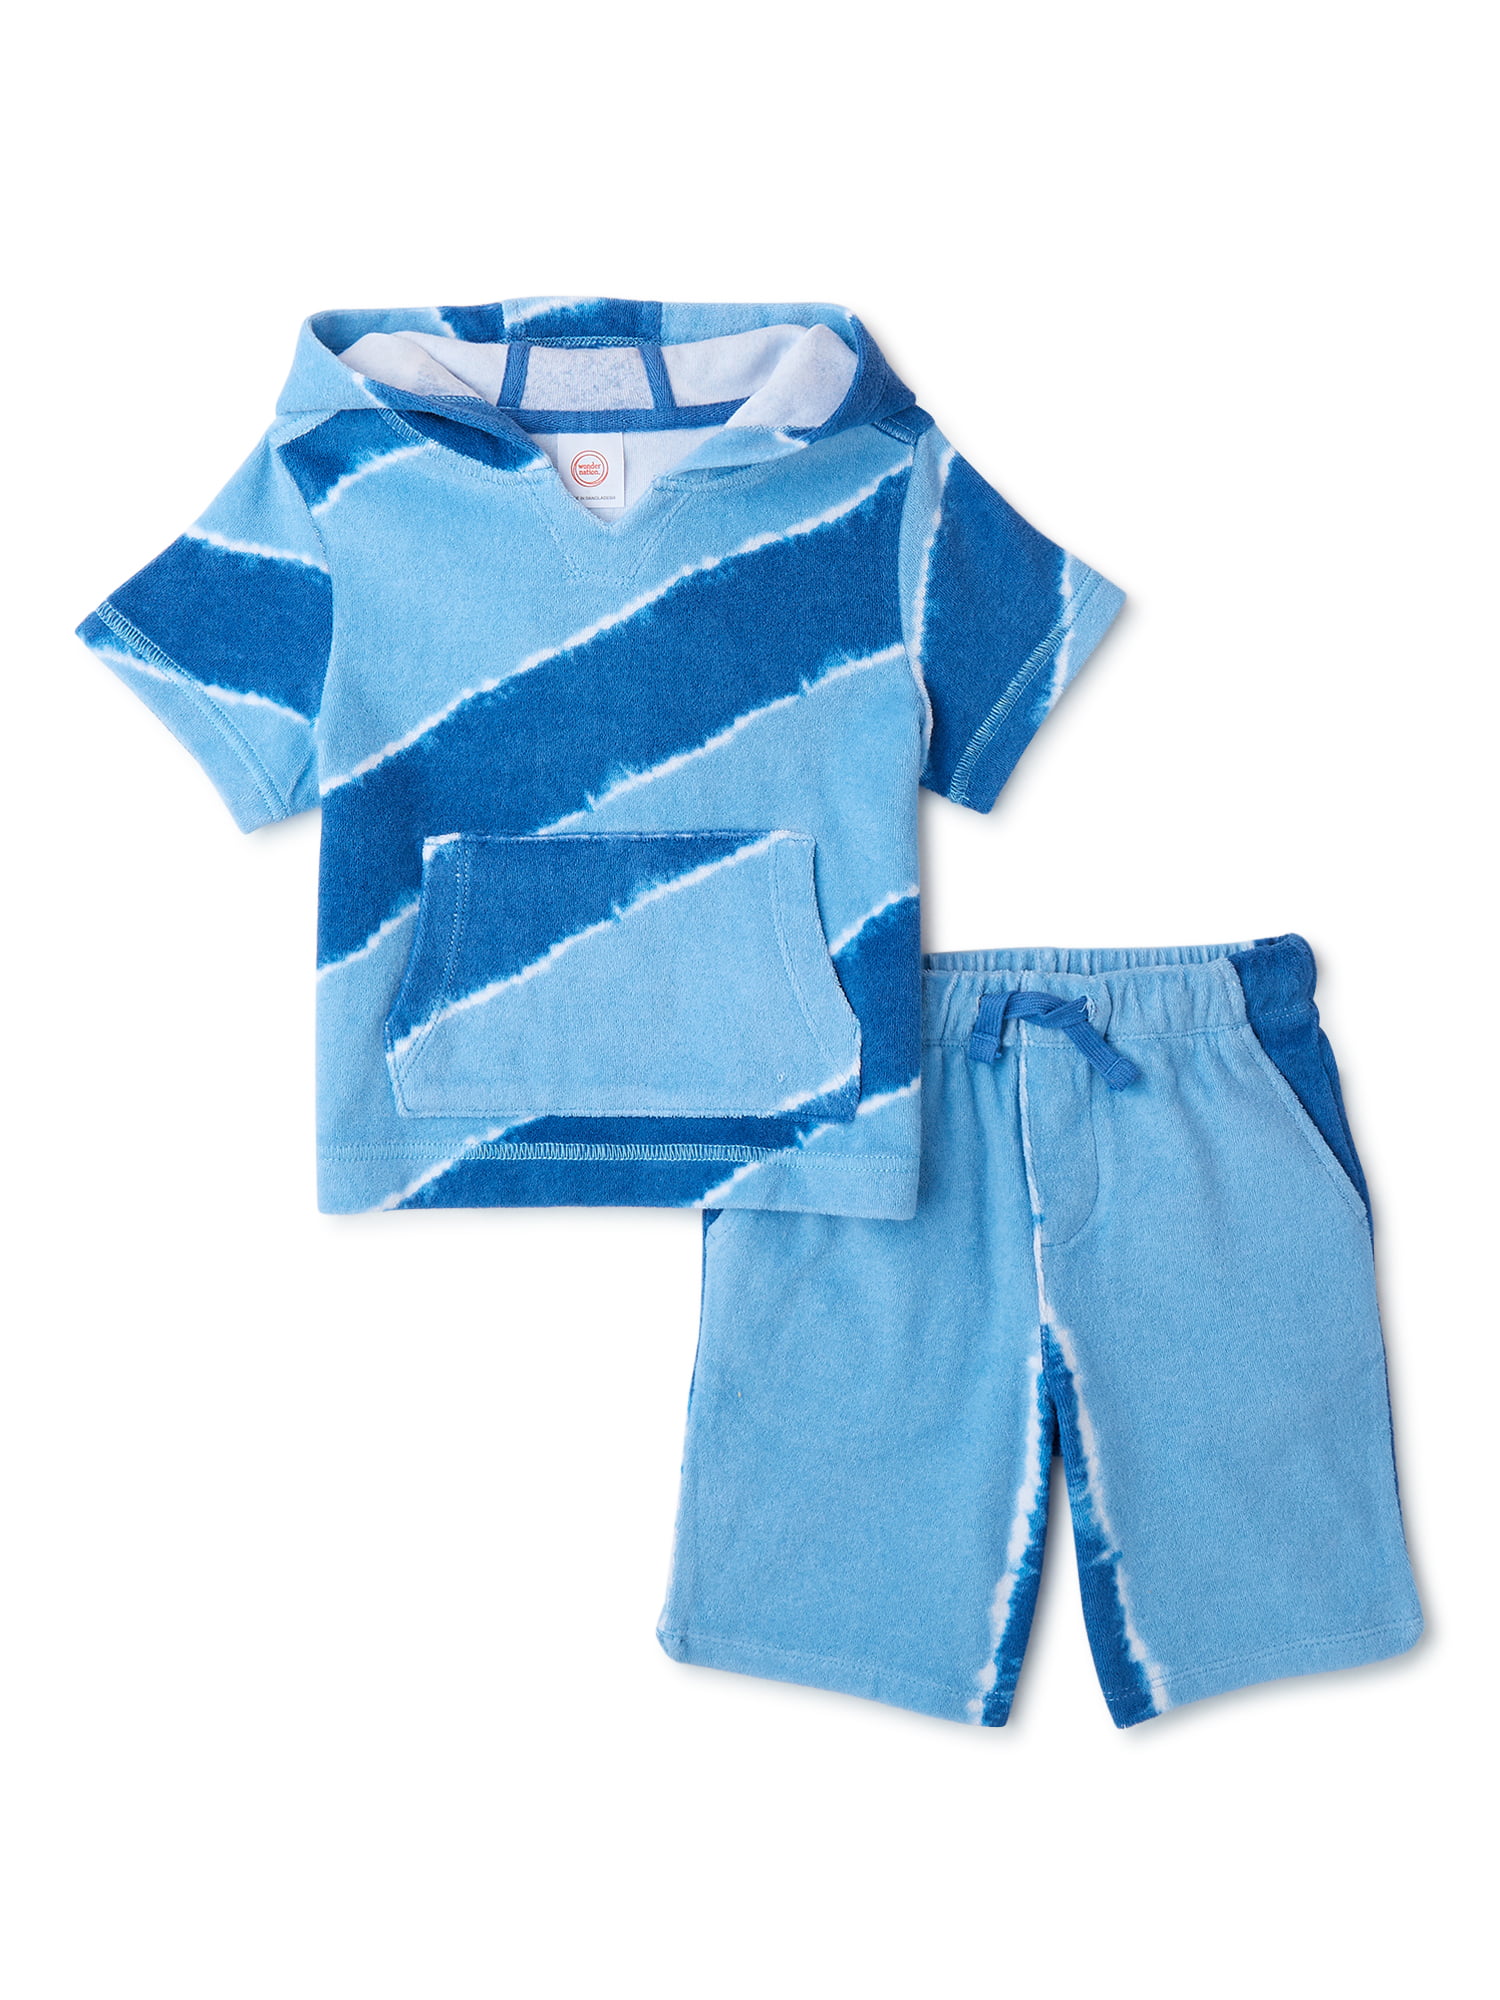 Wonder Nation Baby and Toddler Boys' Towel Terry Outfit Set, 2-Piece,  12M-5T